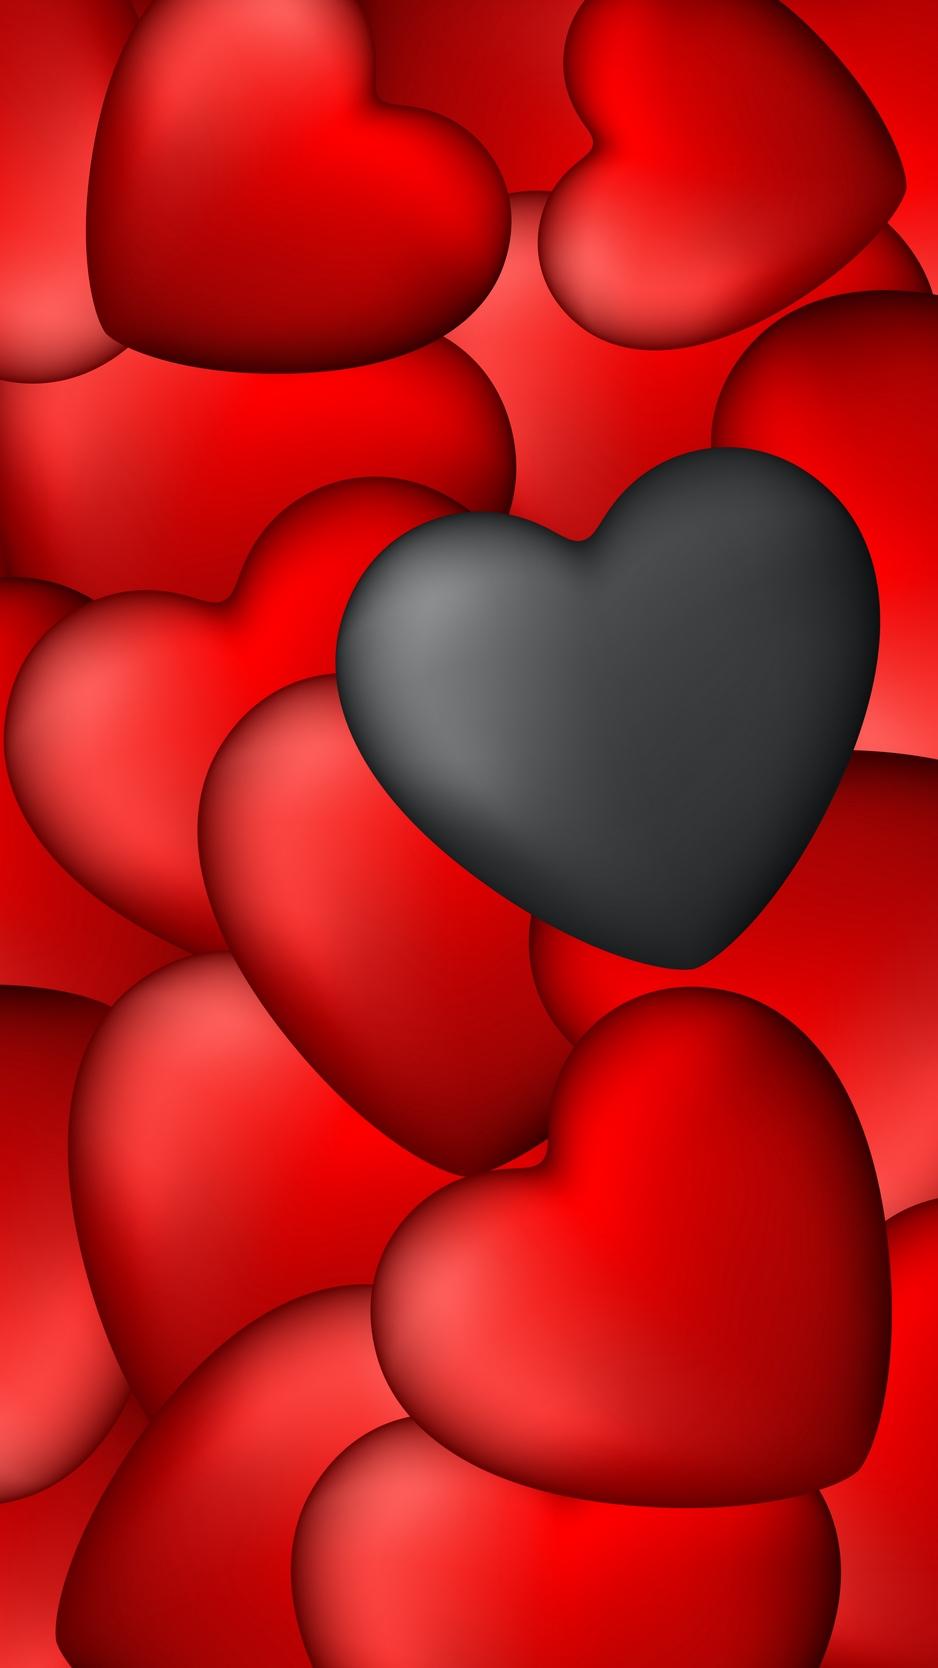 Wallpaper Hearts, Art, Red, Black And Black Heart